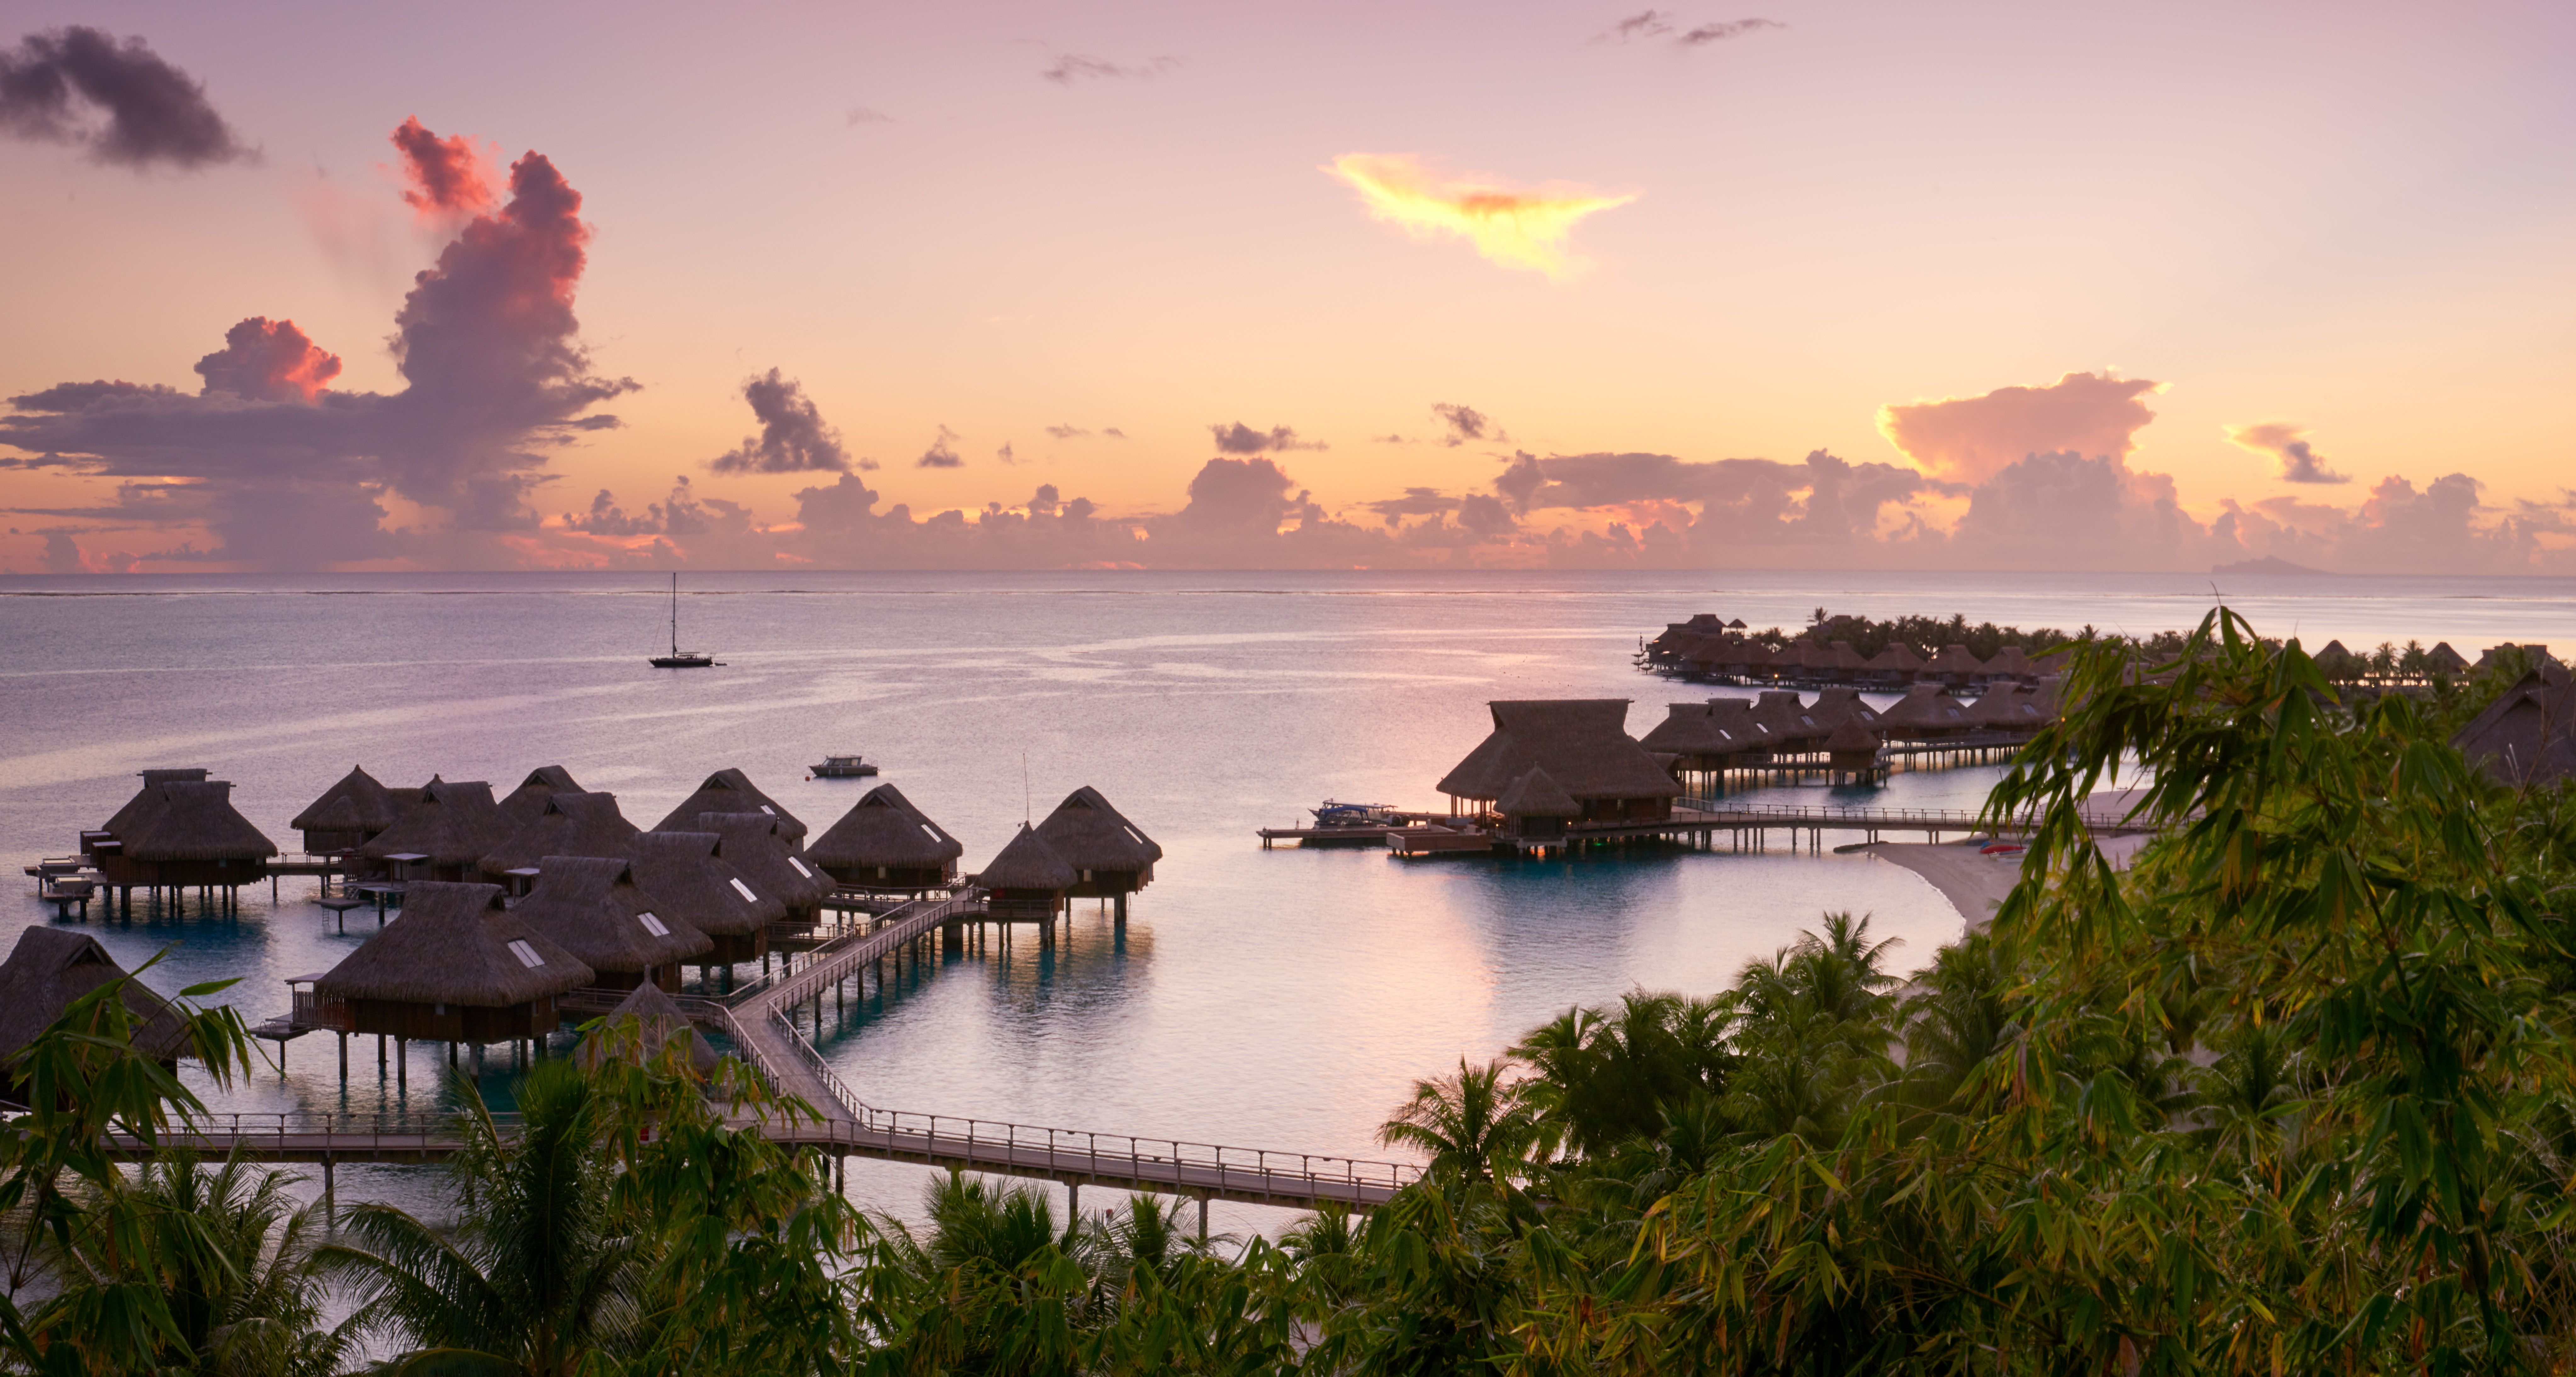 An exterior view of Conrad Bora Bora Nui, one of the best hotels in French Polynesia